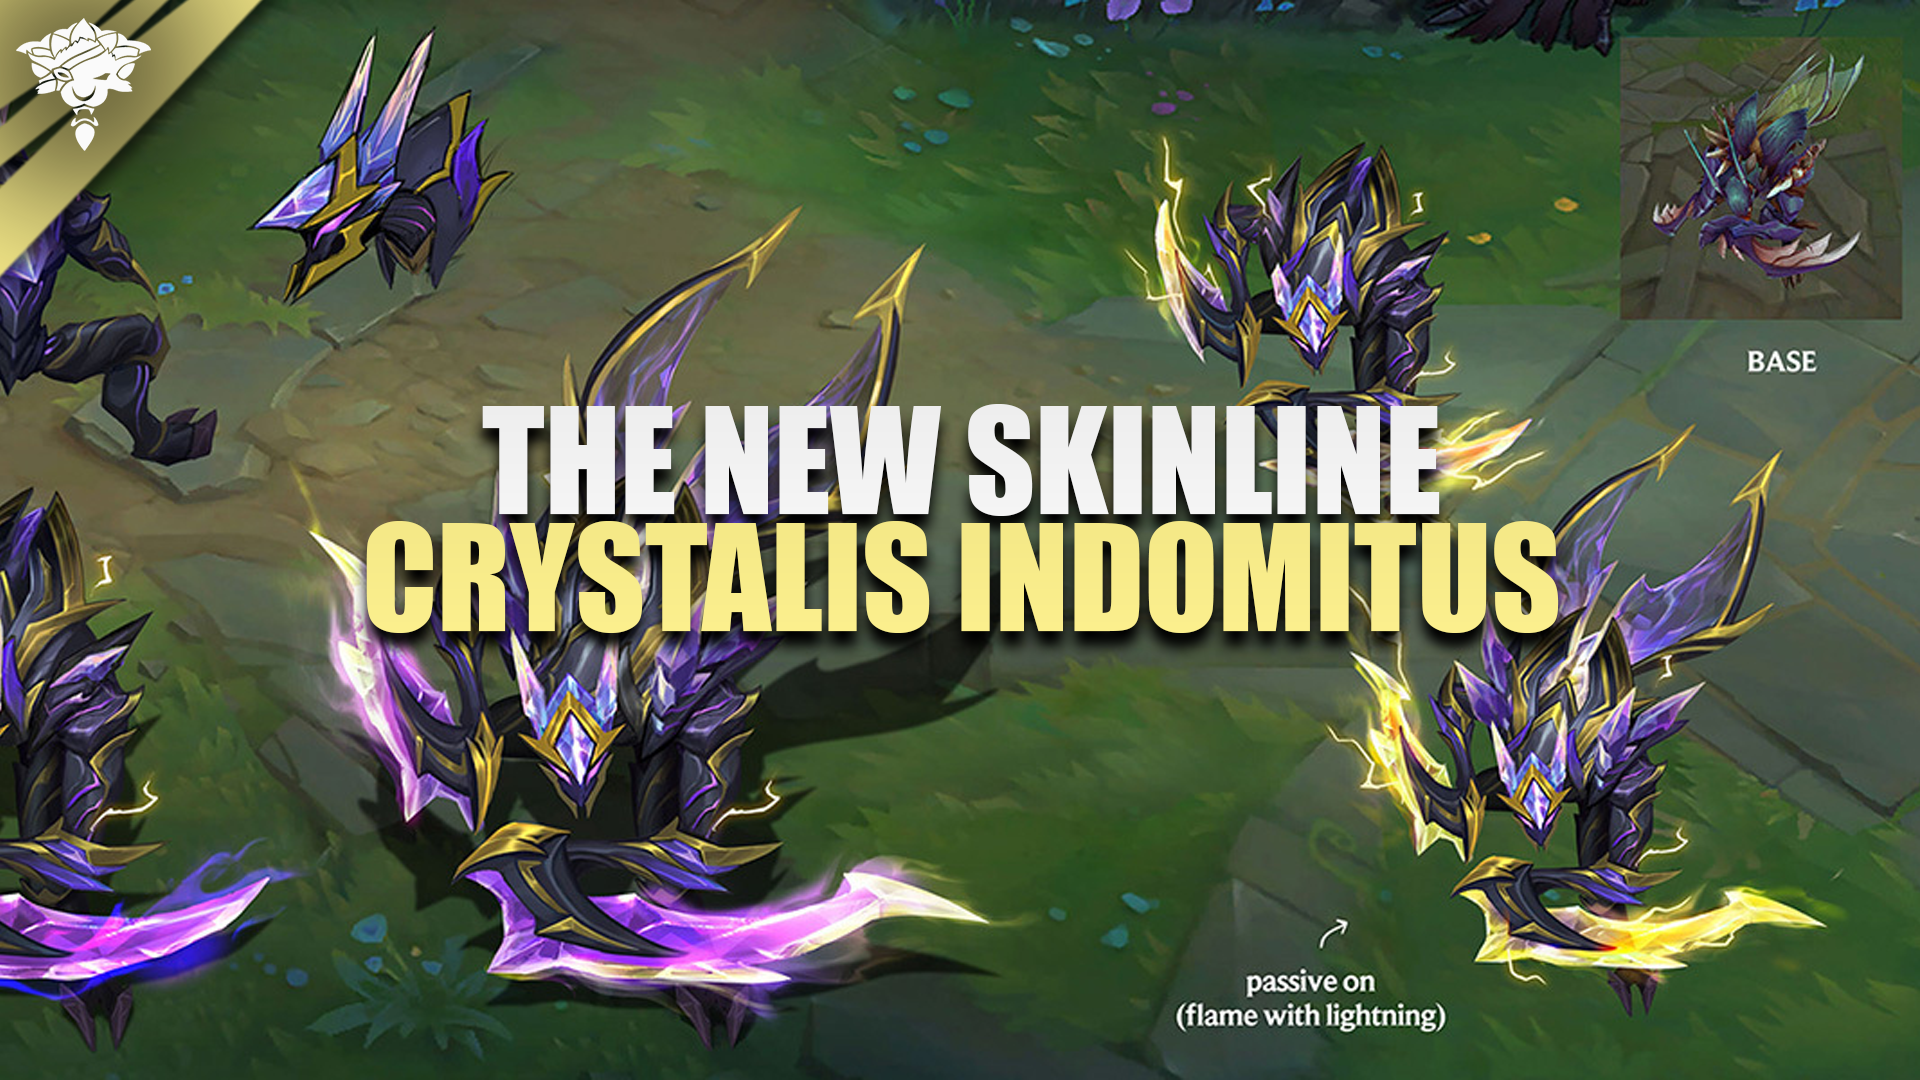 The first champions to get these creepy-cool Crystalis Indomitus skins are Kha'Zix in March, Xerath in June, and Nautilus in August. If you want to look like a crystal monster too, you can grab these skins for 100 Mythic Essence each.